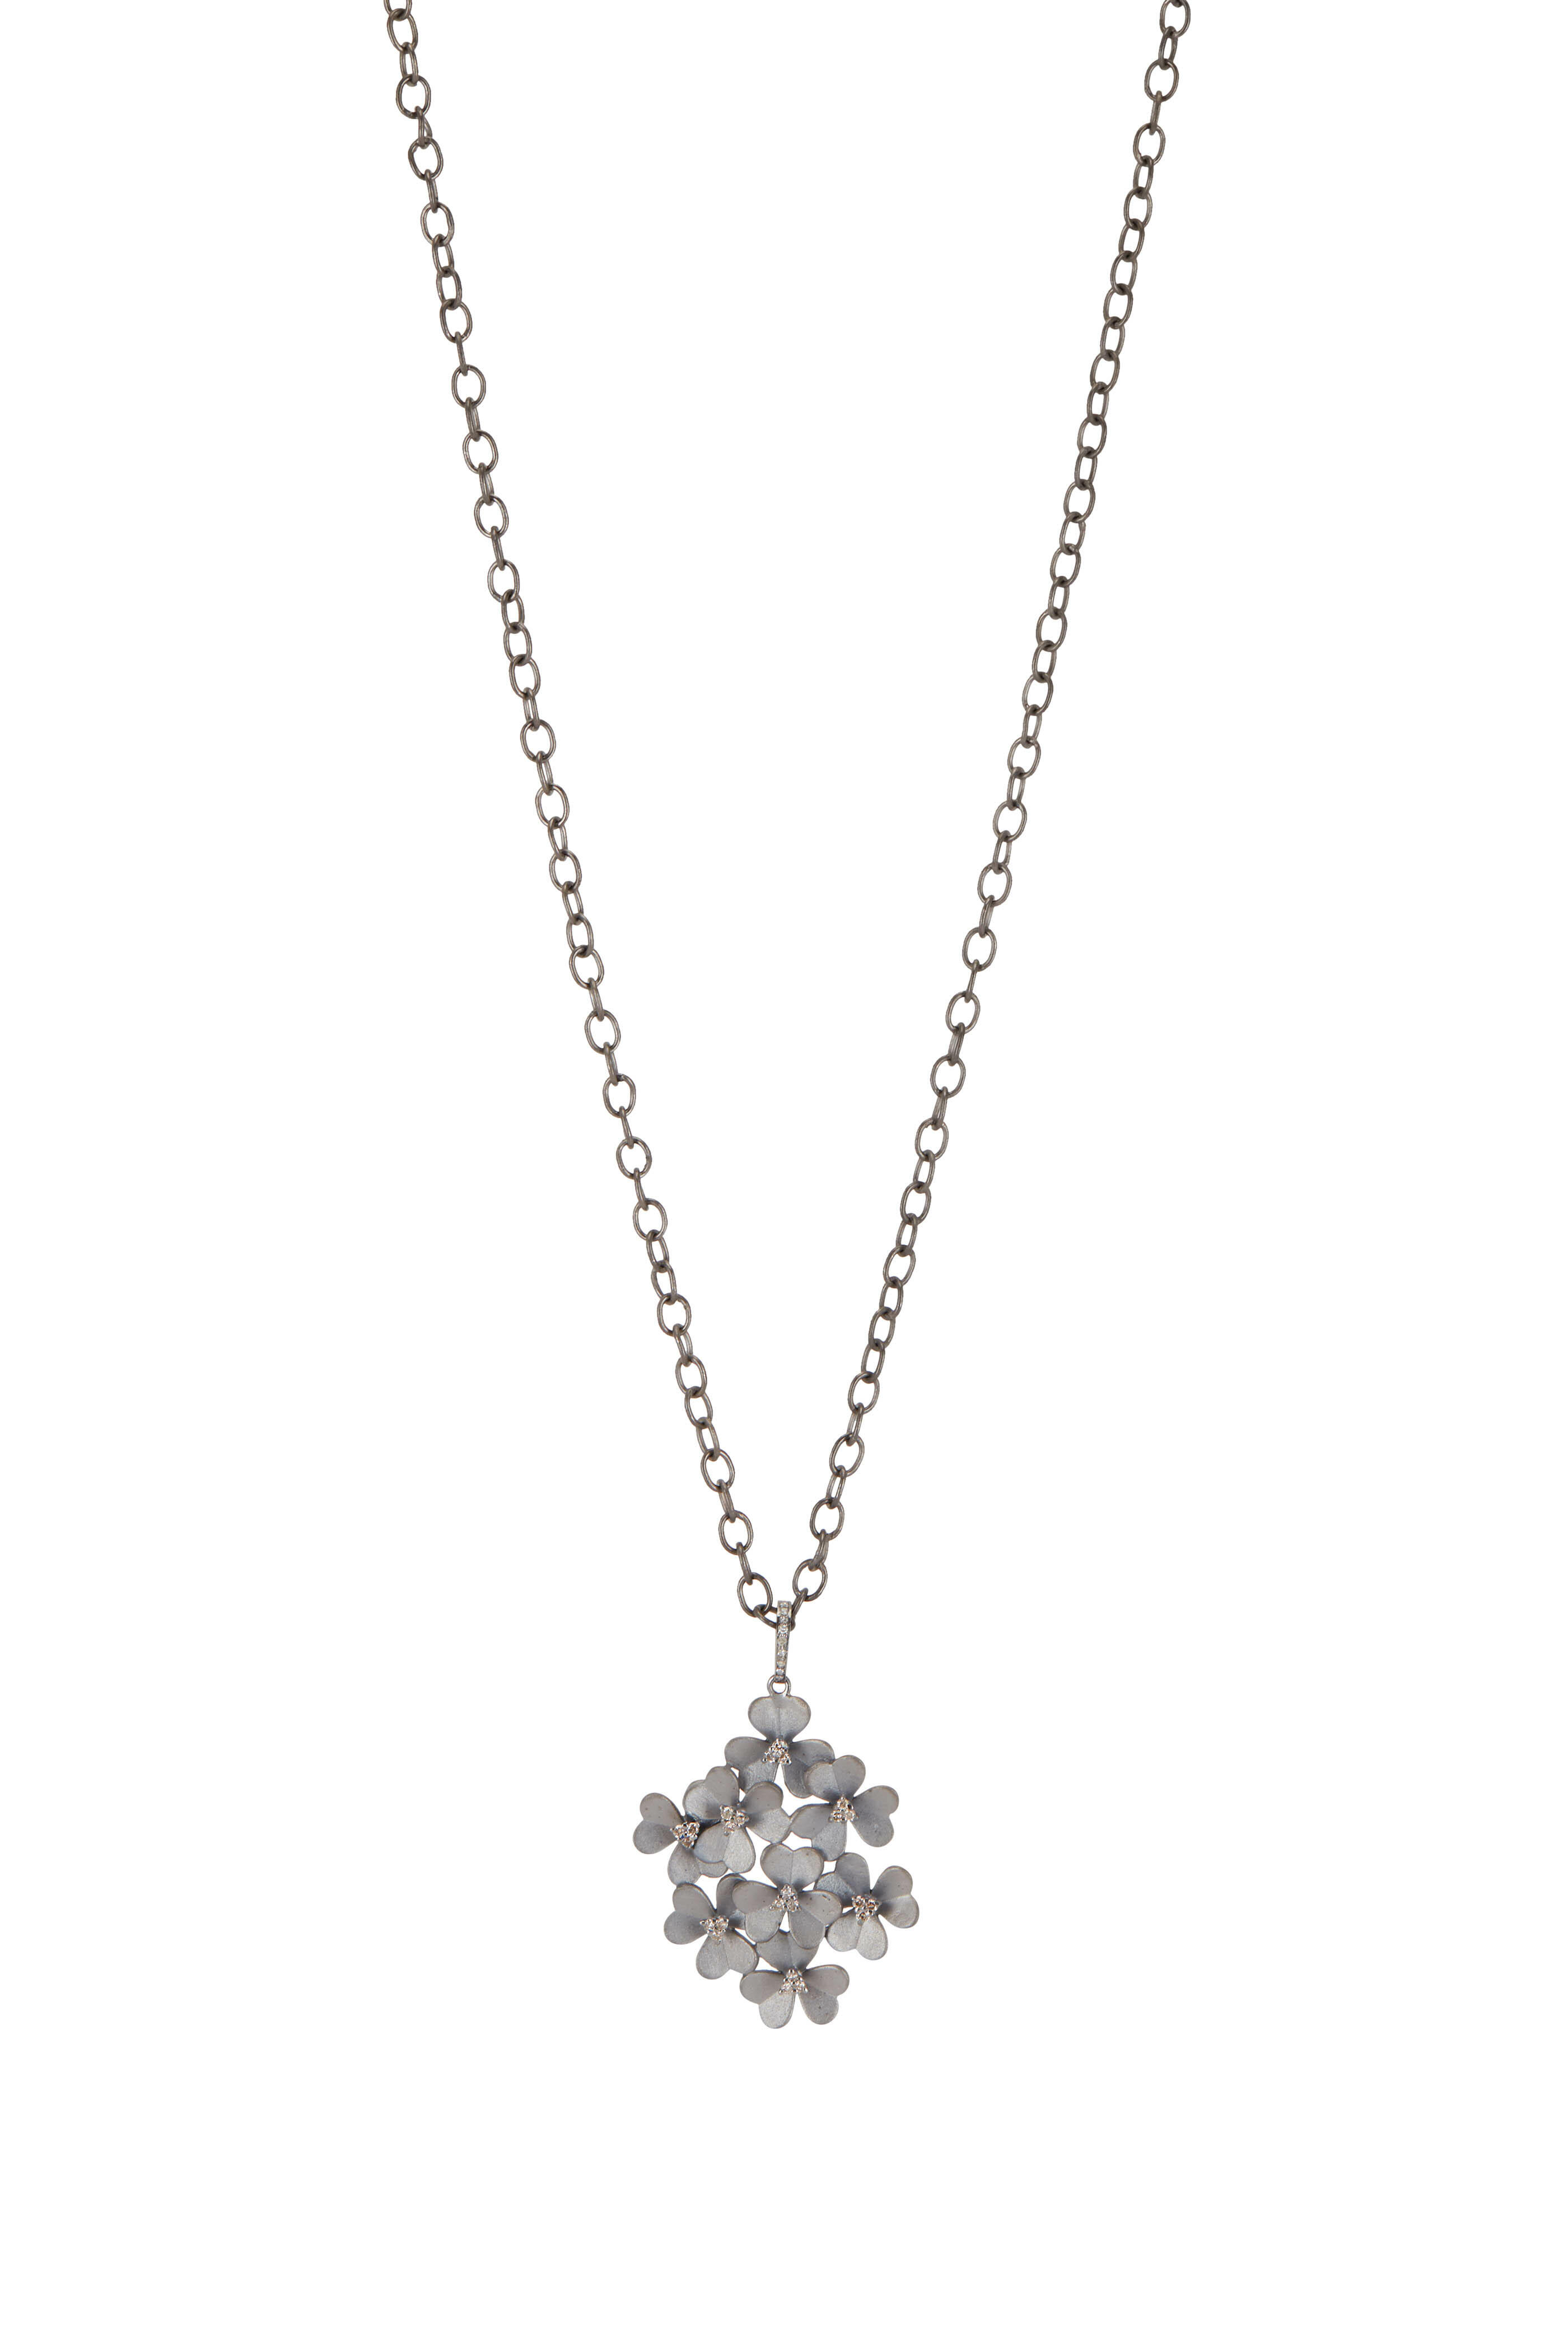 Loriann - Sterling Silver Floral Cluster Necklace